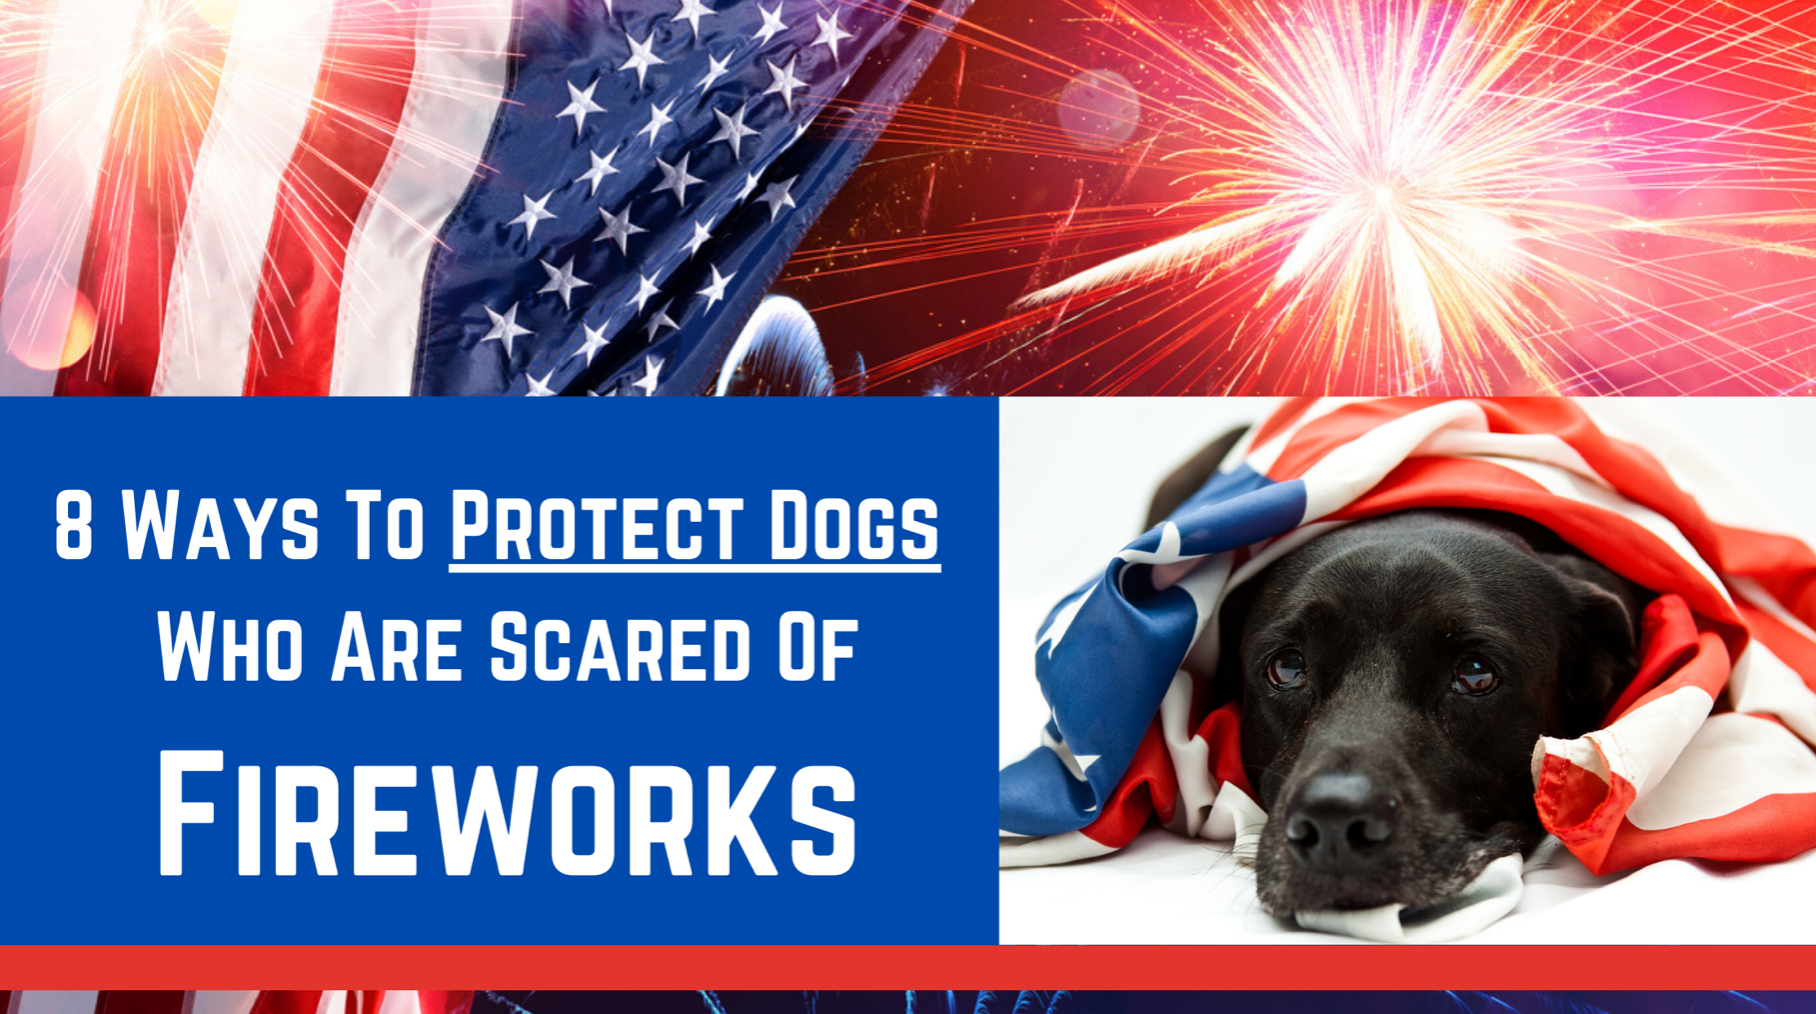 8 Ways To Protect Dogs Who Are Scared Of Fireworks